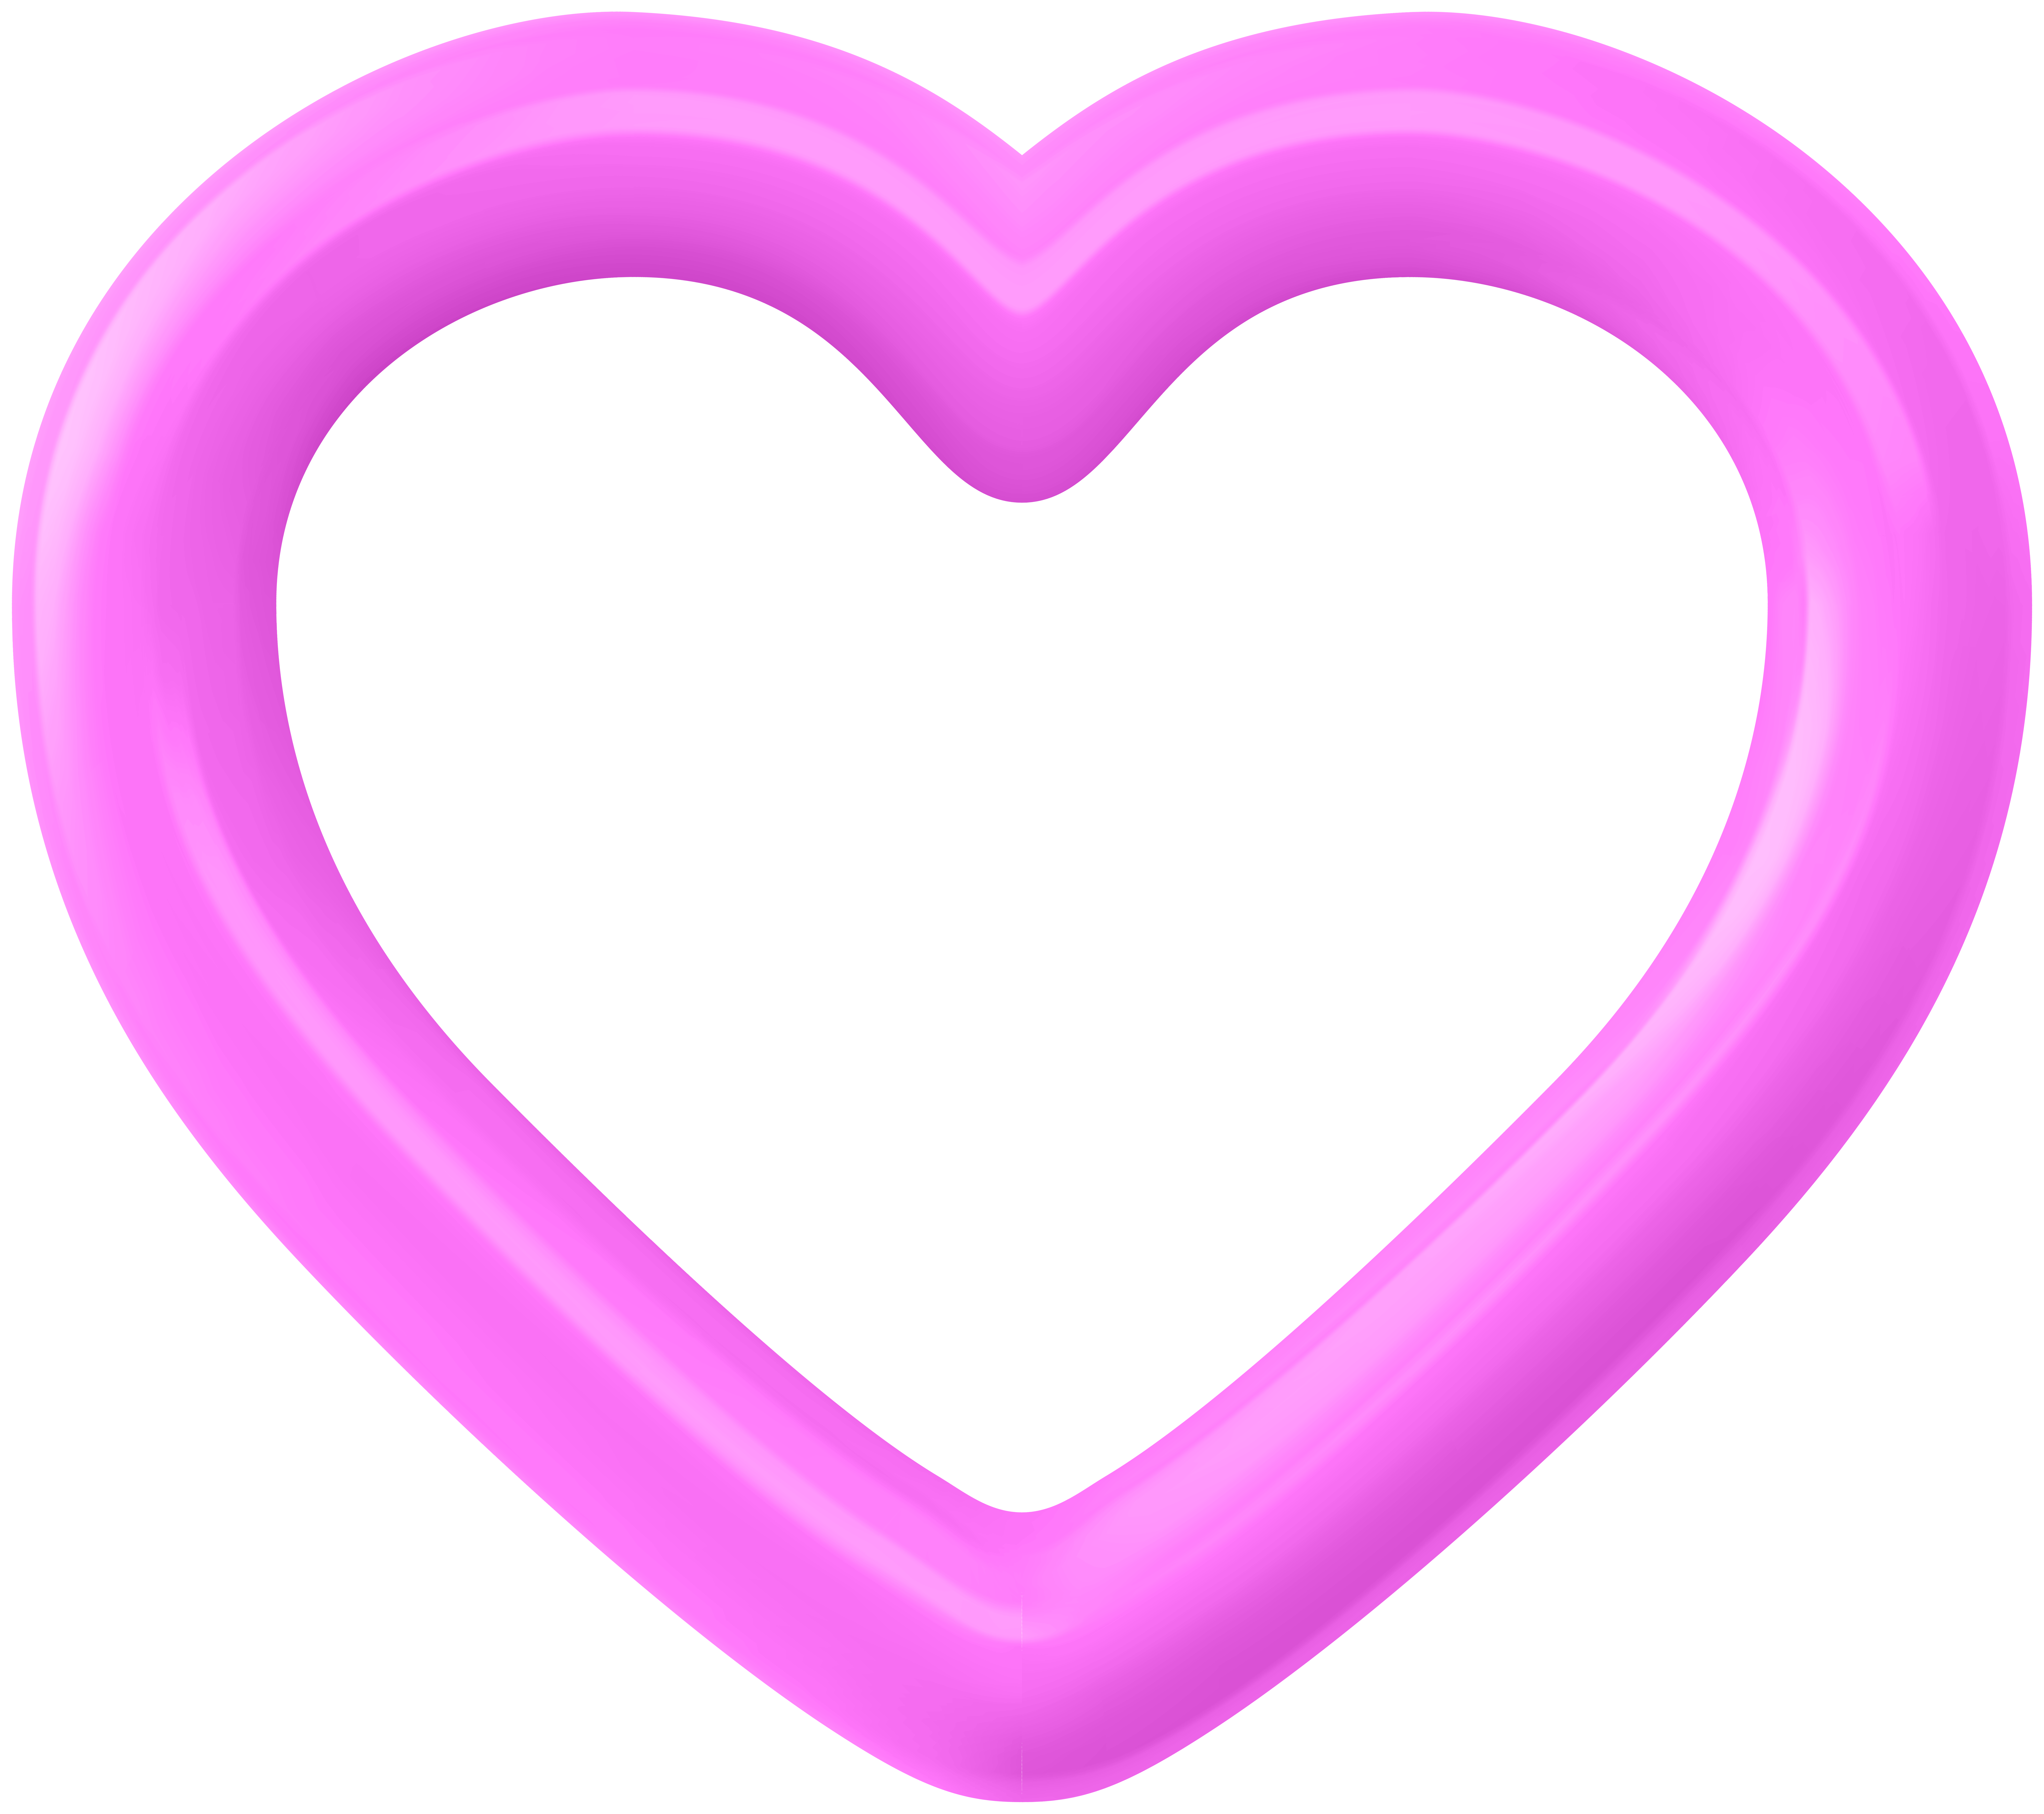 https://gallery.yopriceville.com/var/albums/Free-Clipart-Pictures/Hearts-PNG/Pink_Heart_Shaped_Frame_Transparent_Clipart.png?m=1609762733